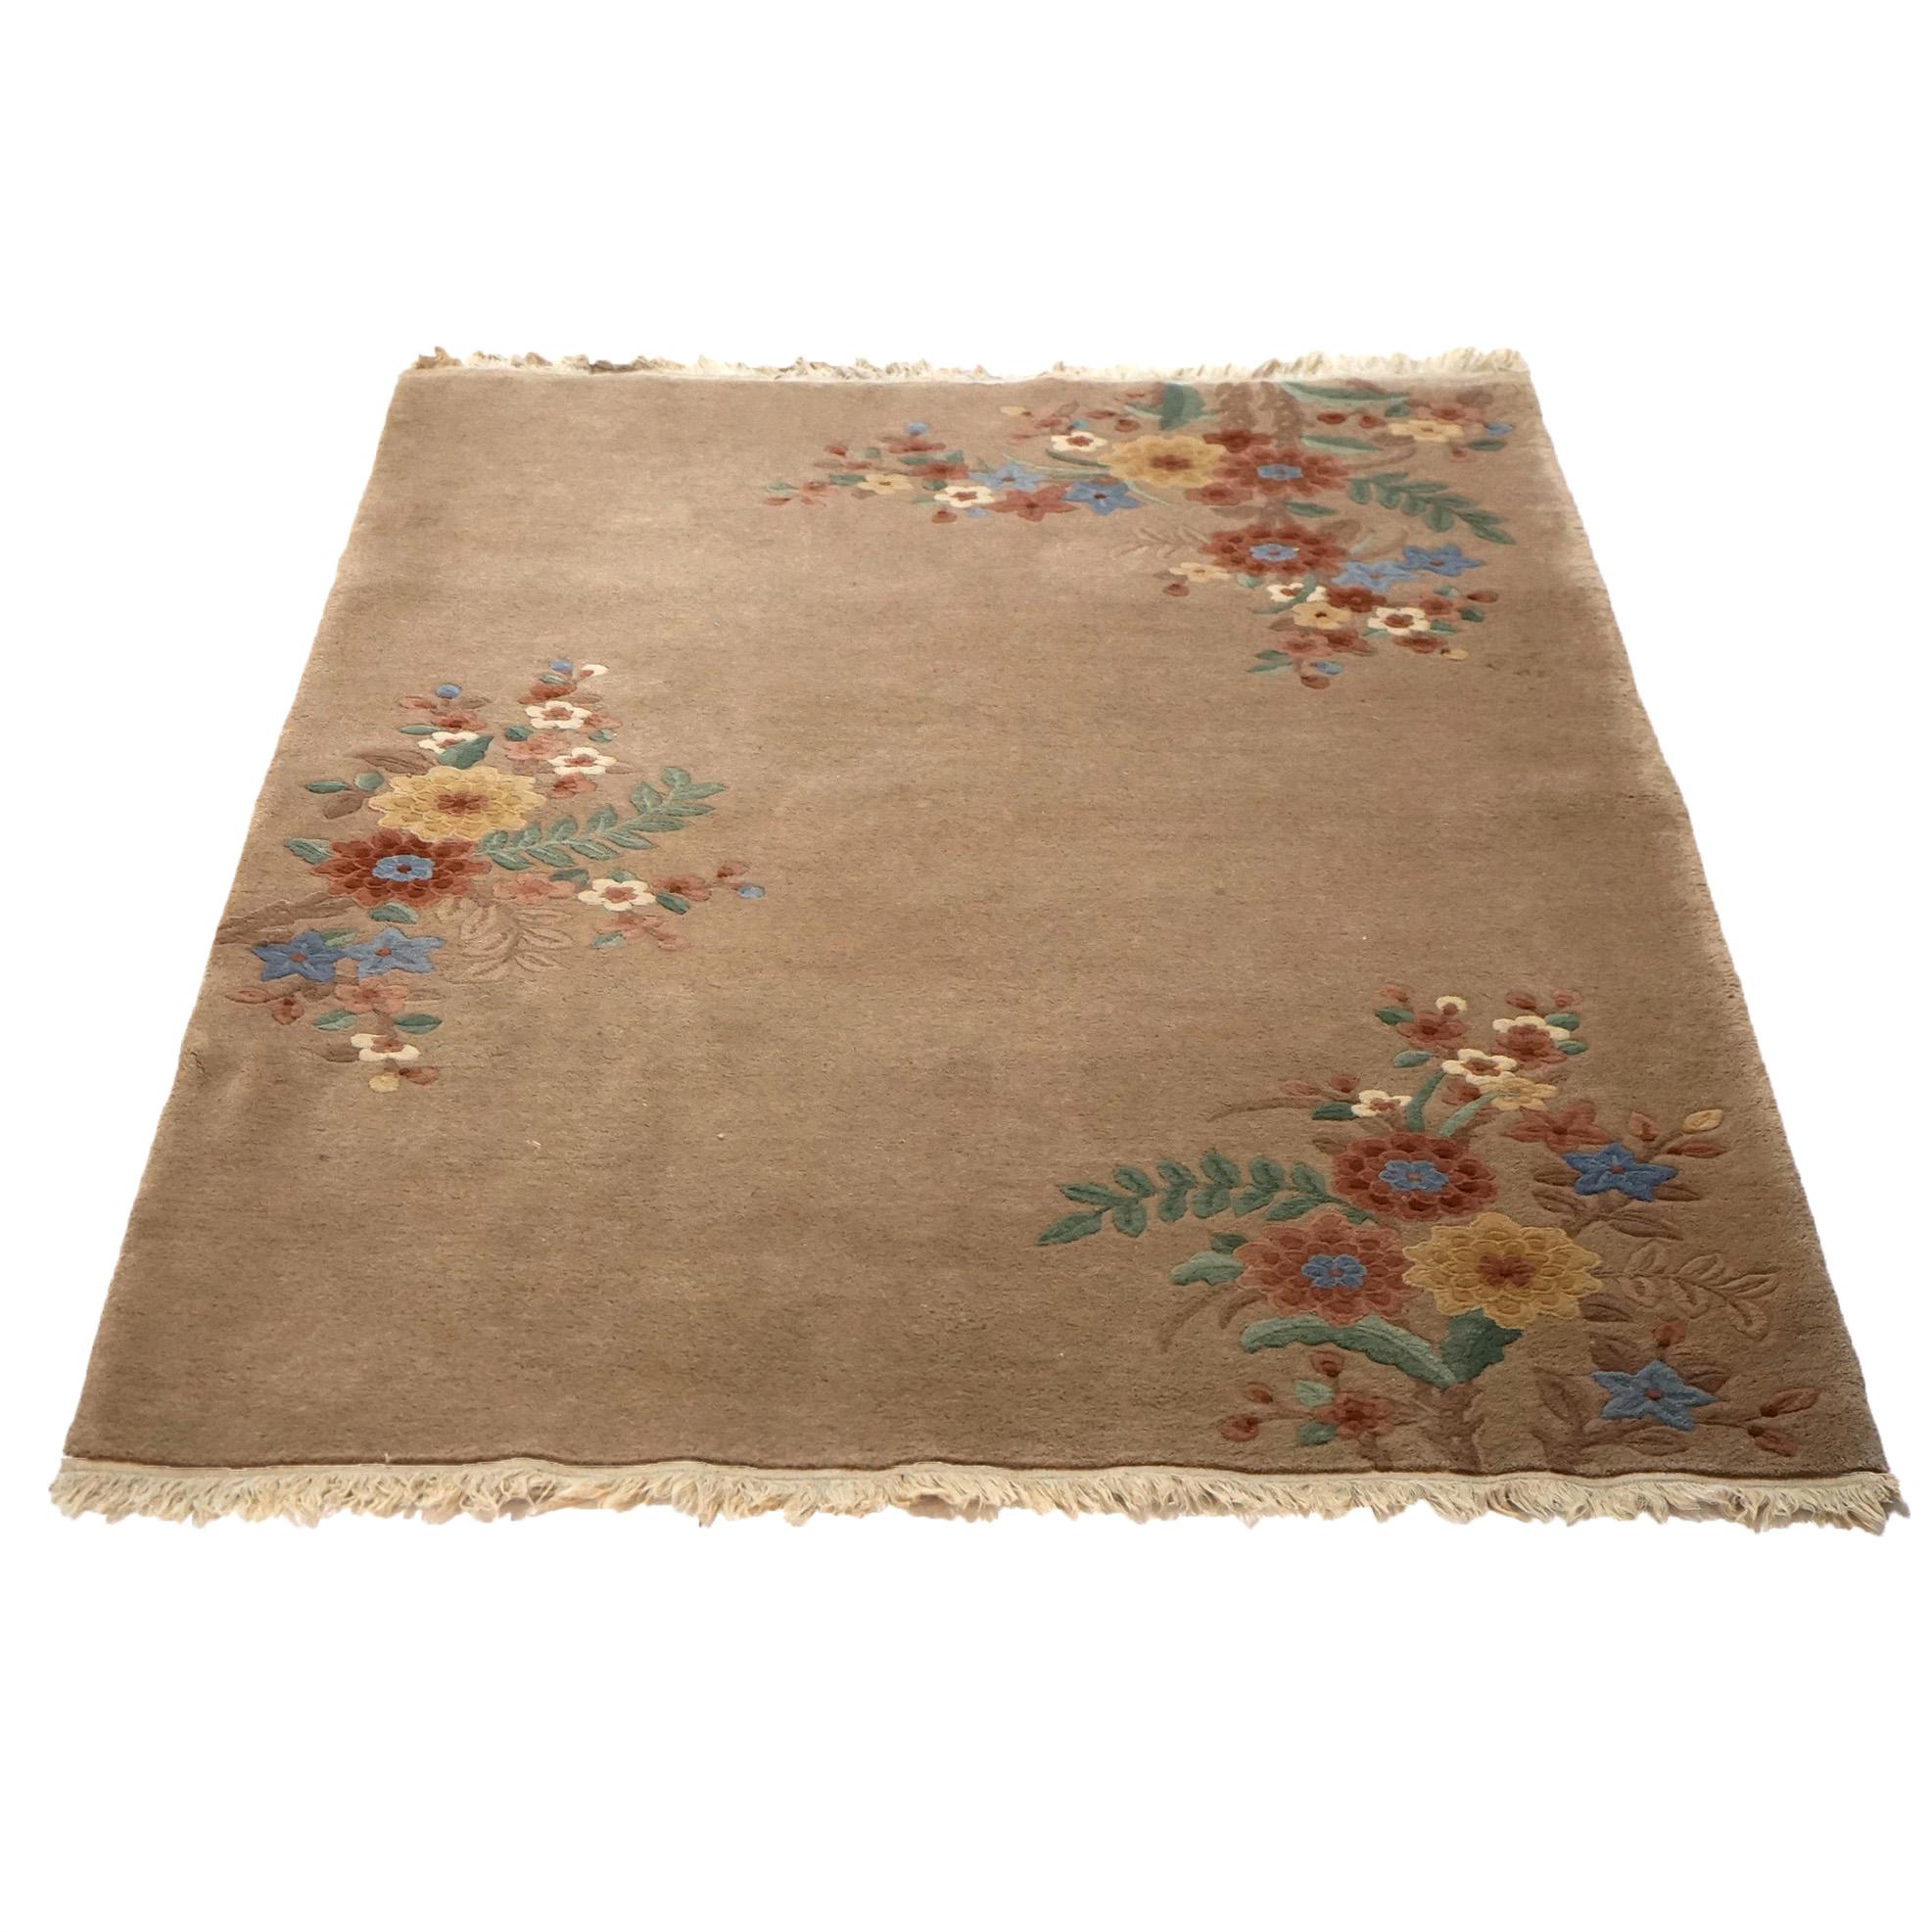 Antique Nichols Peking Chinese Oriental Wool Rug with Flowers C1930

Measures- 92.5''L x 54.5''W x 1''D